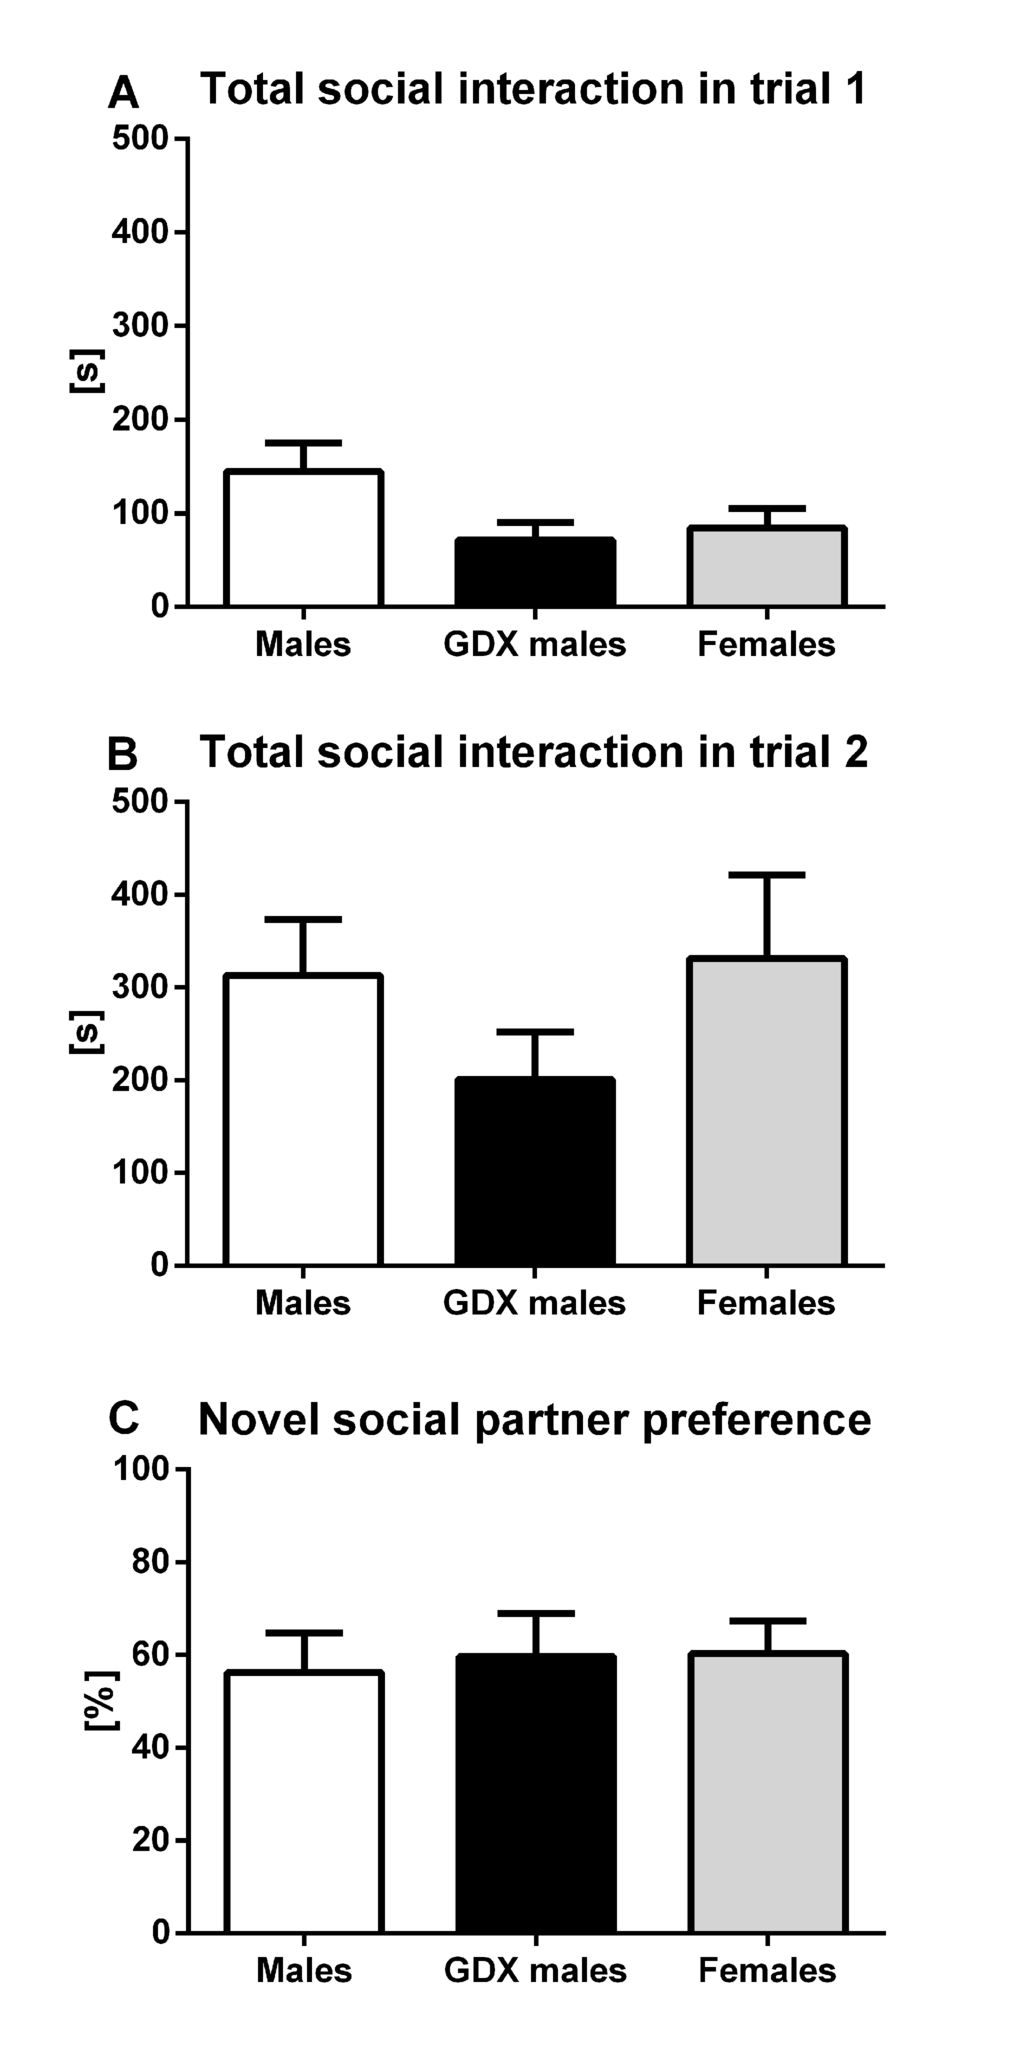 Sociability and preference for social novelty in aged rats. (A) Total social interaction time in trial 1 and (B) trial 2. (C) Preference for novel social partner in trial 2 for males (white bar), GDX males (black bar) and females (grey bar). There were no statistically significant differences in the analyzed parameters between groups. Data are expressed as means + SEM.